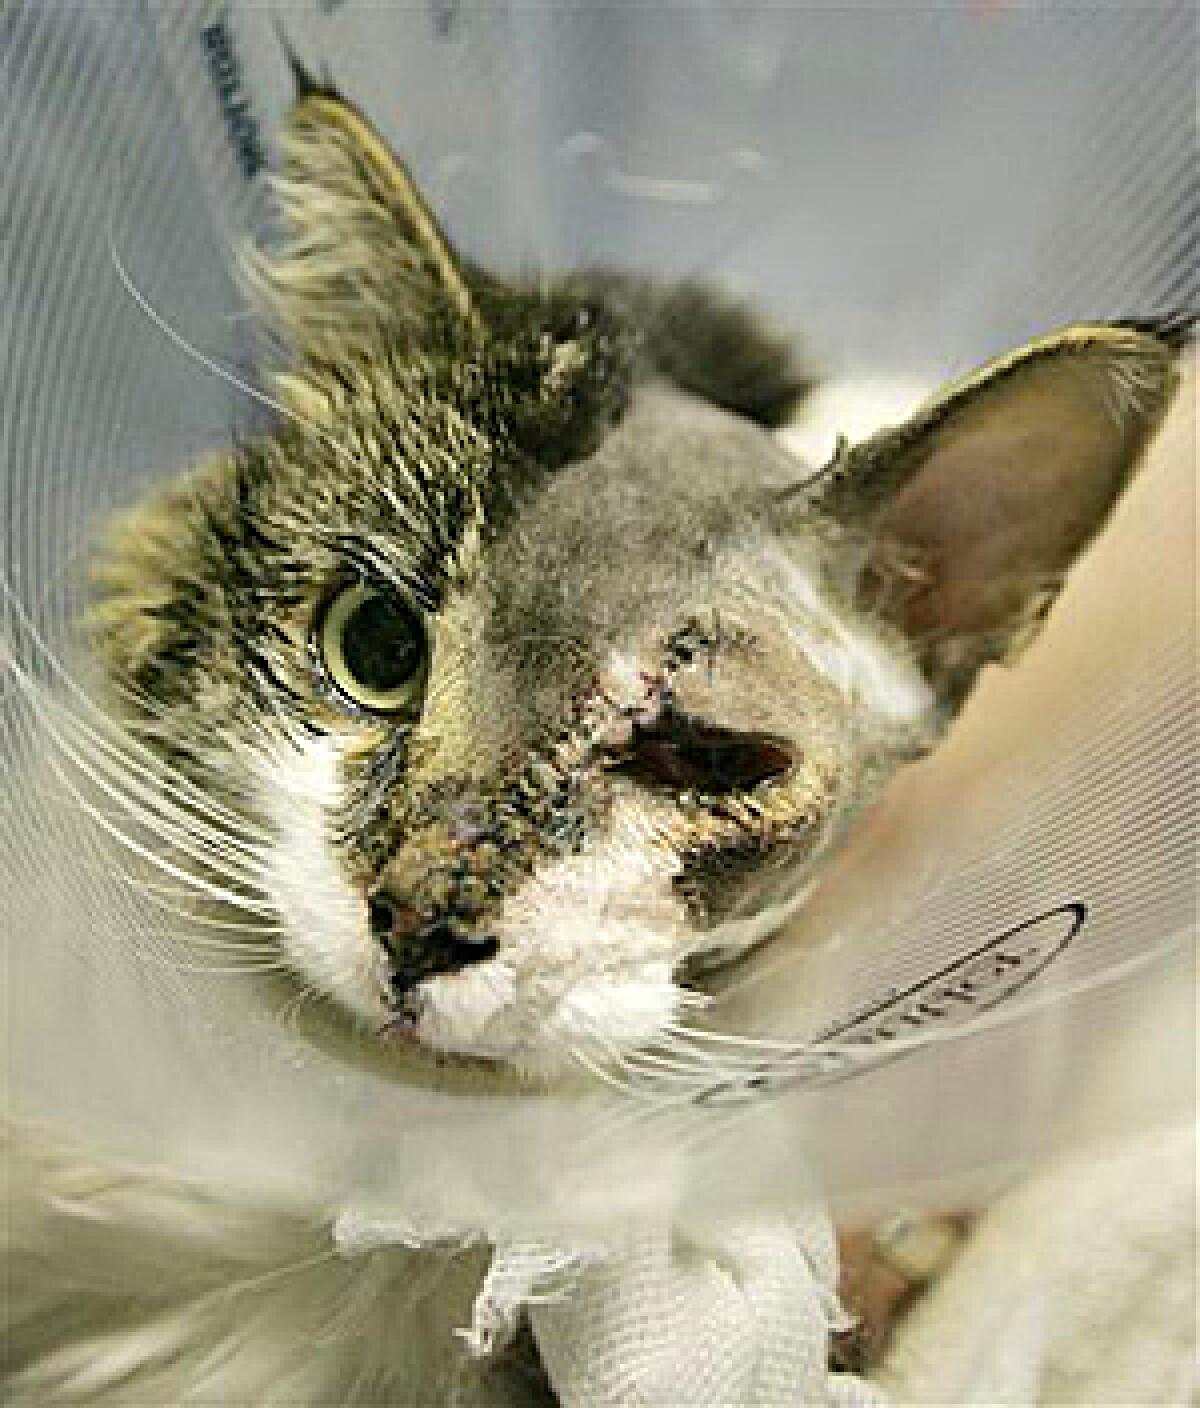 Edgar, a 4-year-old long-haired female cat, is seen with stitches running the length of her face while resting with an Elizabethan collar around her neck following surgery at the Angel Animal Medical Center, in Boston, Tuesday, Dec. 9, 2008. Veterinarians completed an unusual surgery to reattach the face of the cat that was slashed by a car's fan belt while she apparently tried to stay warm under the hood.